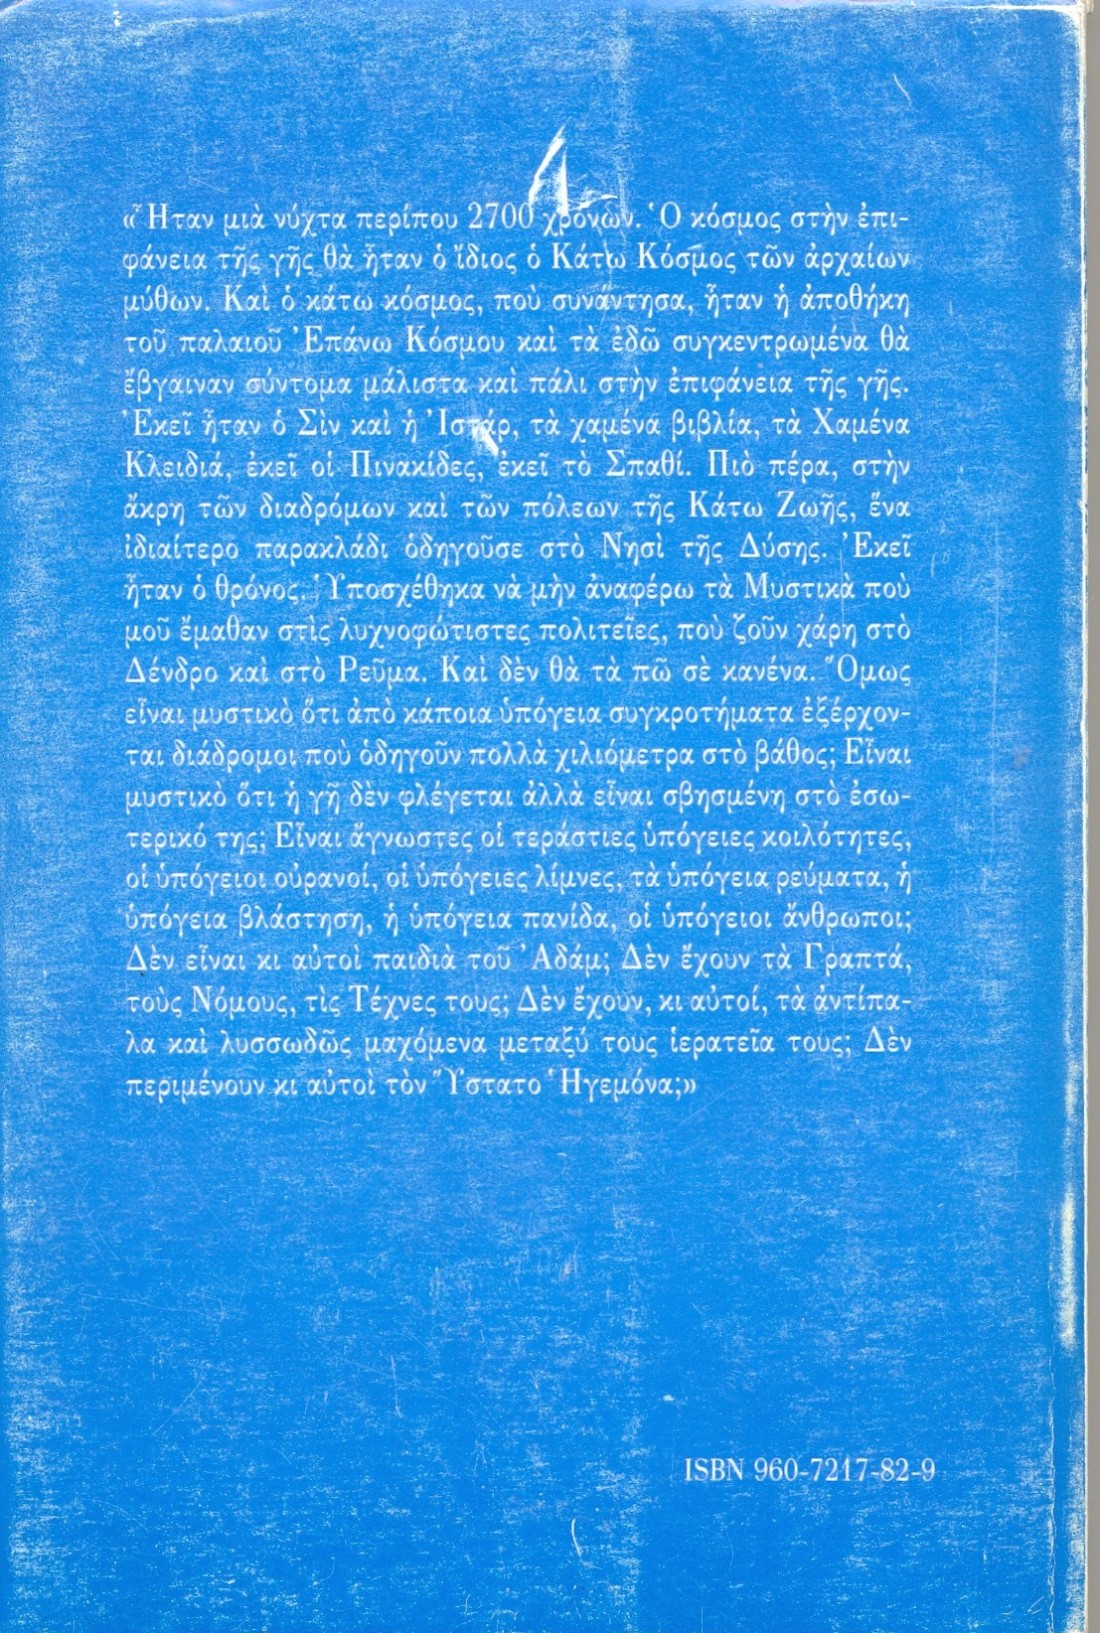 Back Cover Page of the book.jpg